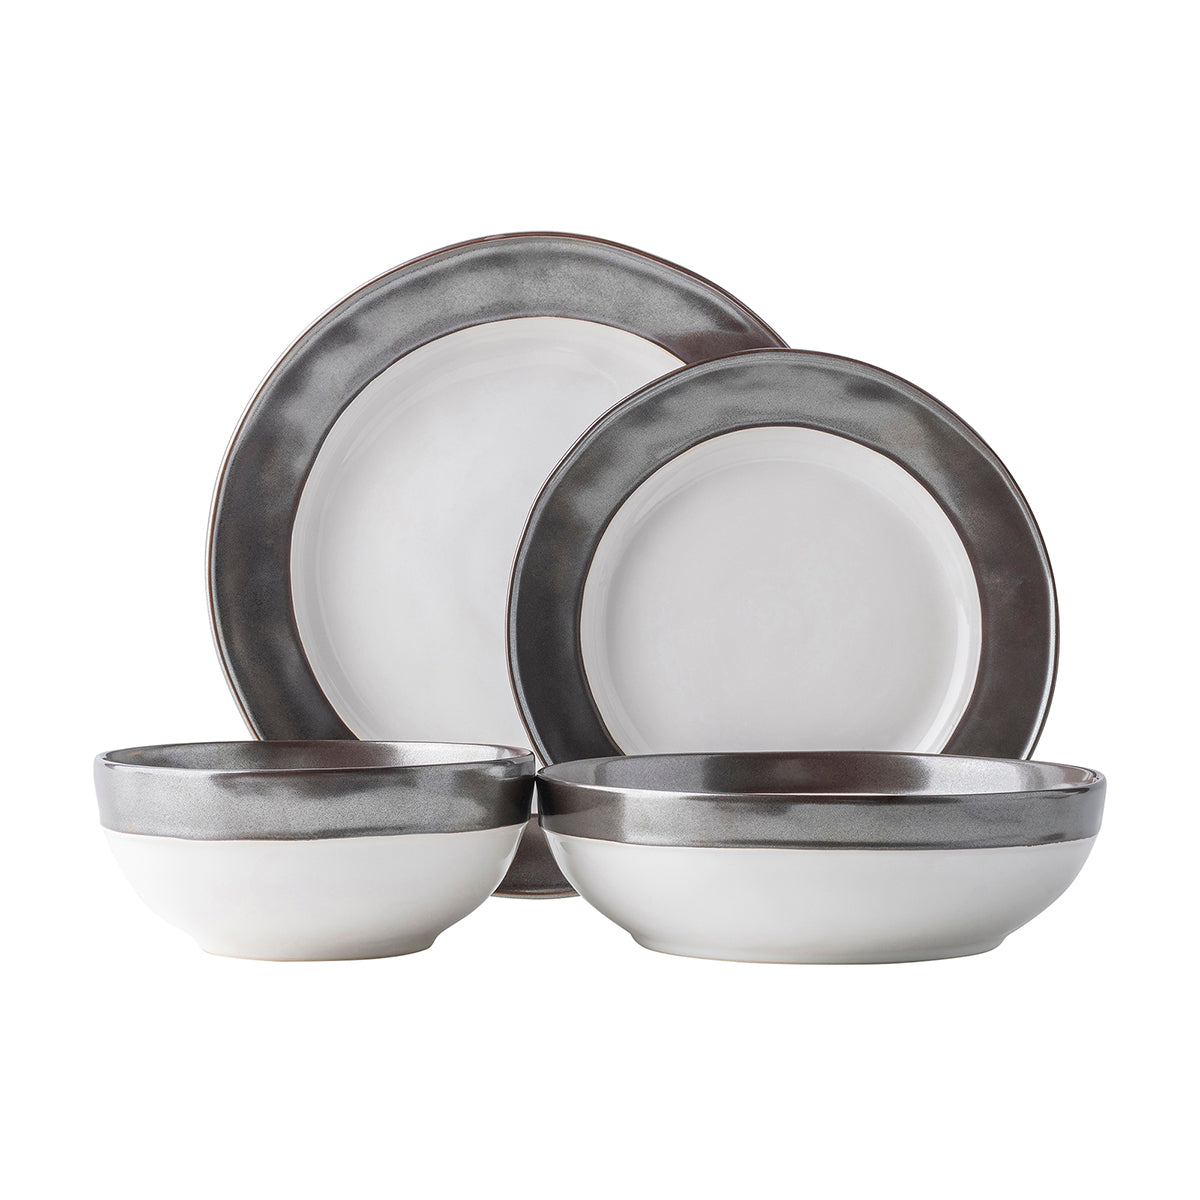 Emerson White/Pewter Place Setting, Set of 4